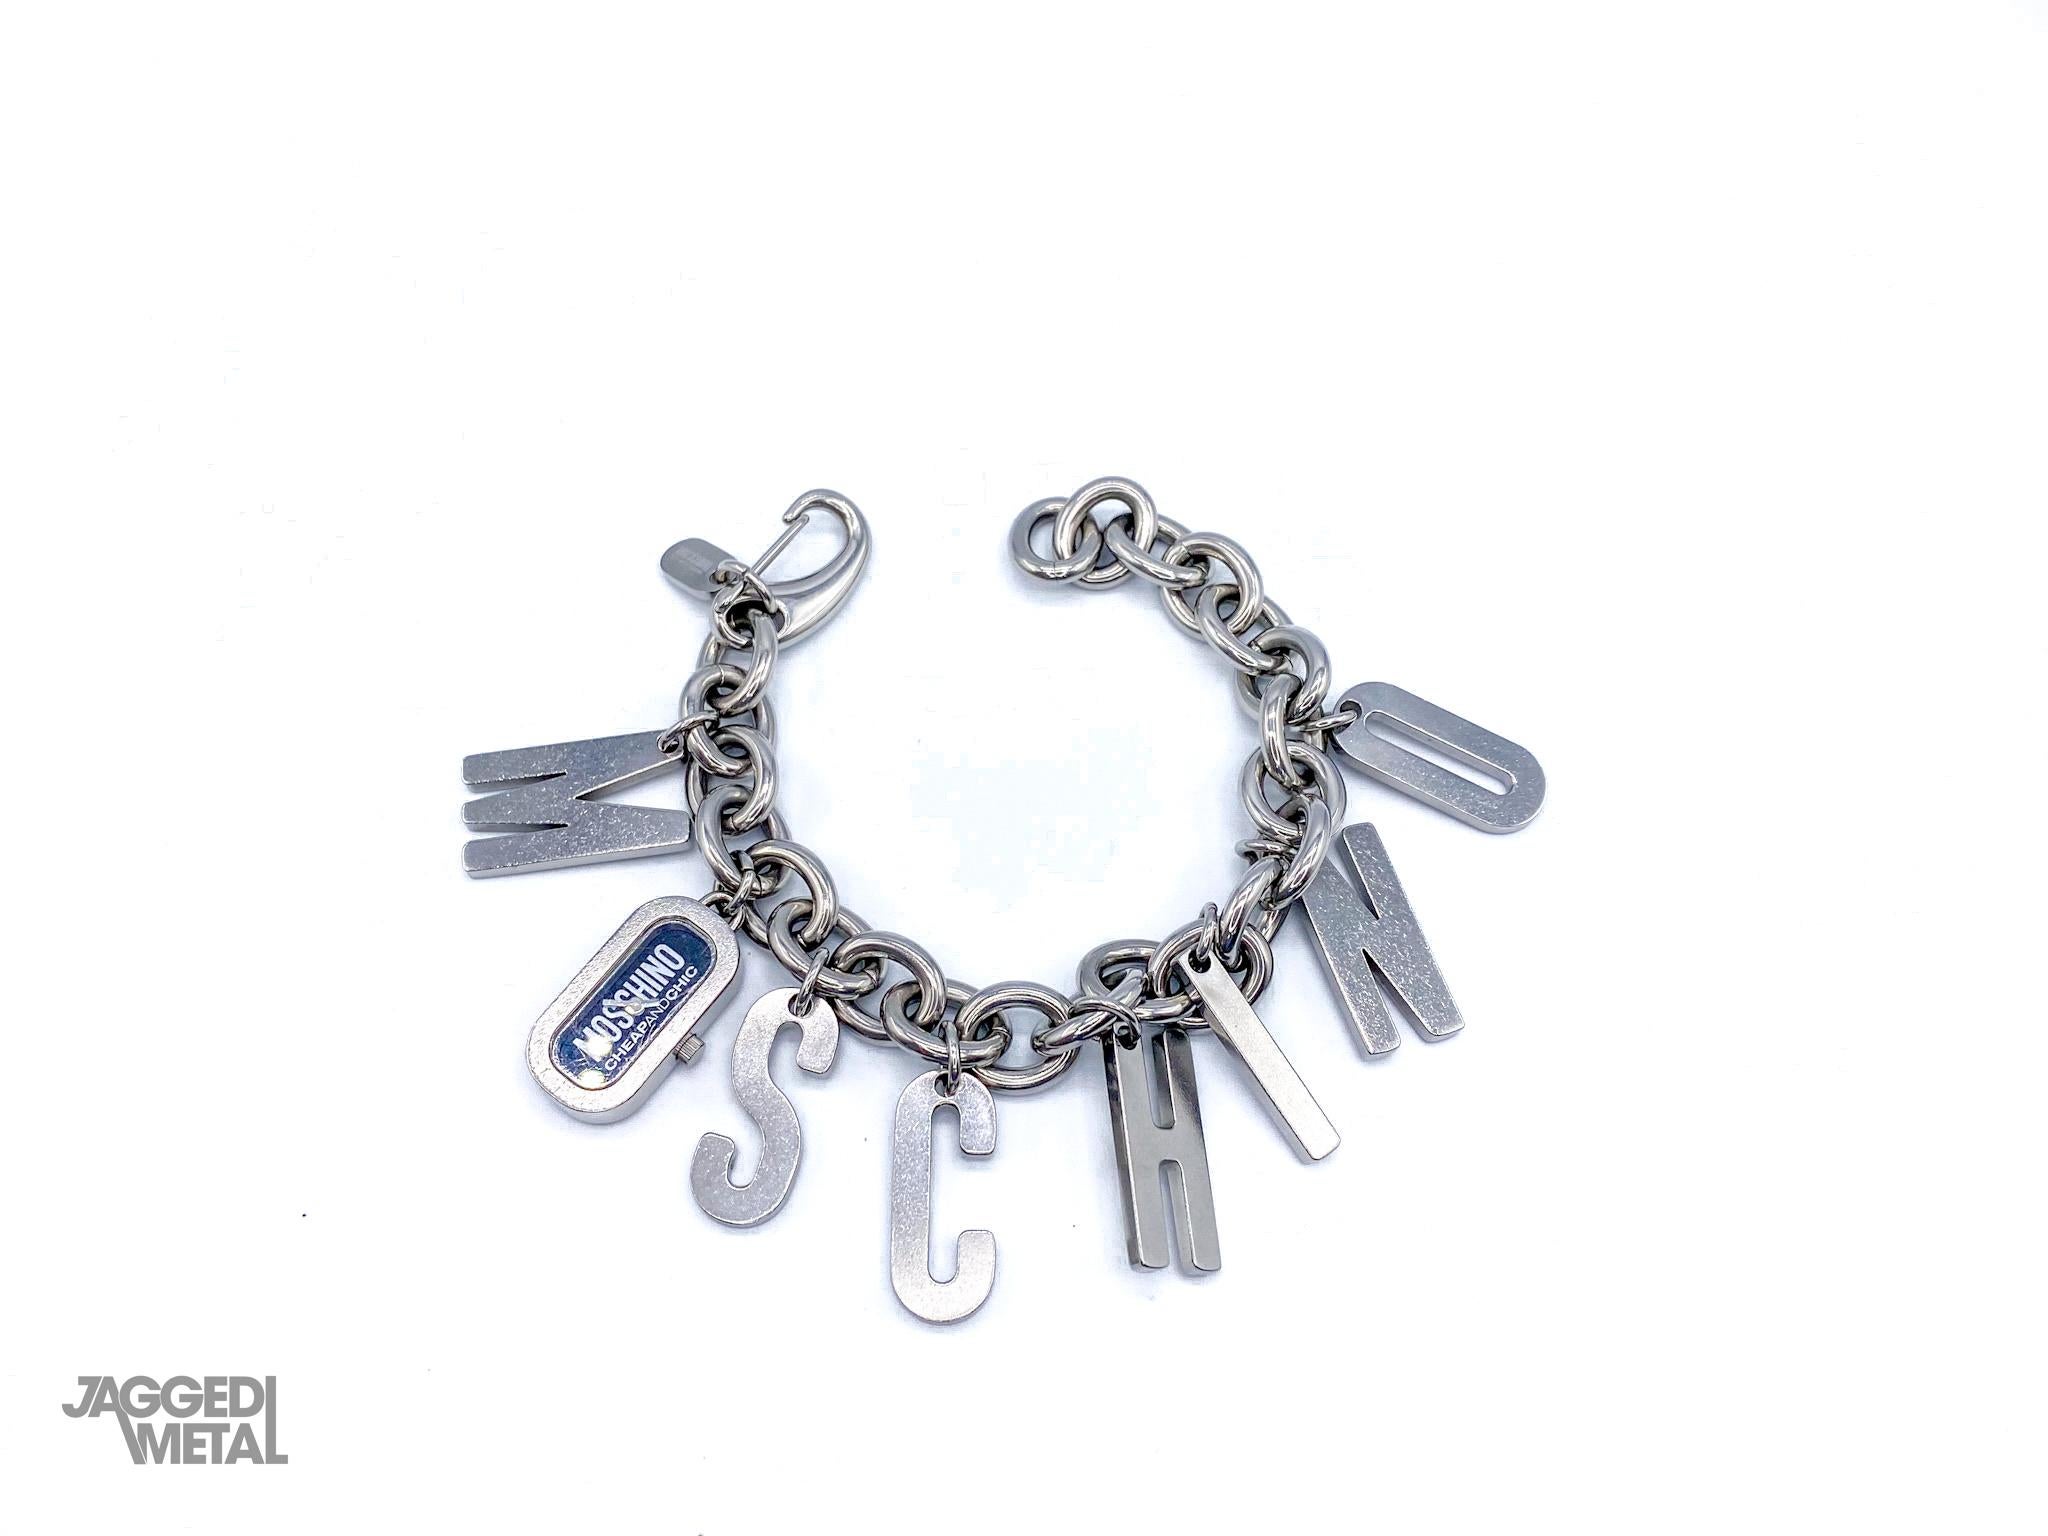 Moschino 1990s Vintage Charm Bracelet

Amazing statement piece from the iconic house of Moschino. Doubles up as a bracelet and watch.

Detail
-Made in the early 2000s
-Cast from stainless steel metal
-8 charms which spell out the letters